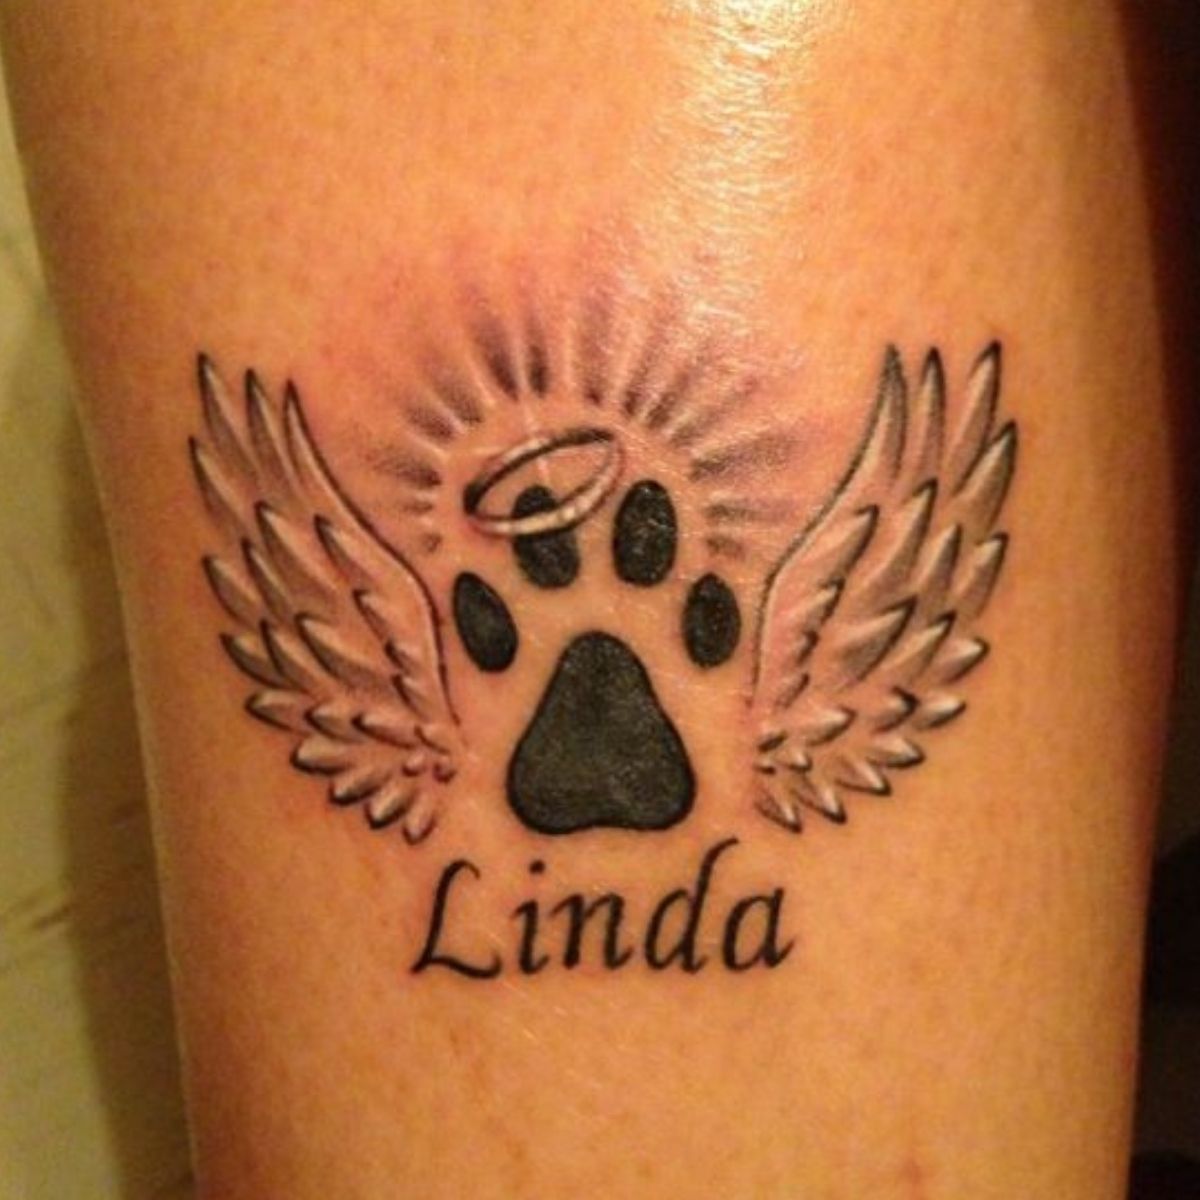 52 Beautiful And Heartwarming Tattoos Dedicated To Pets